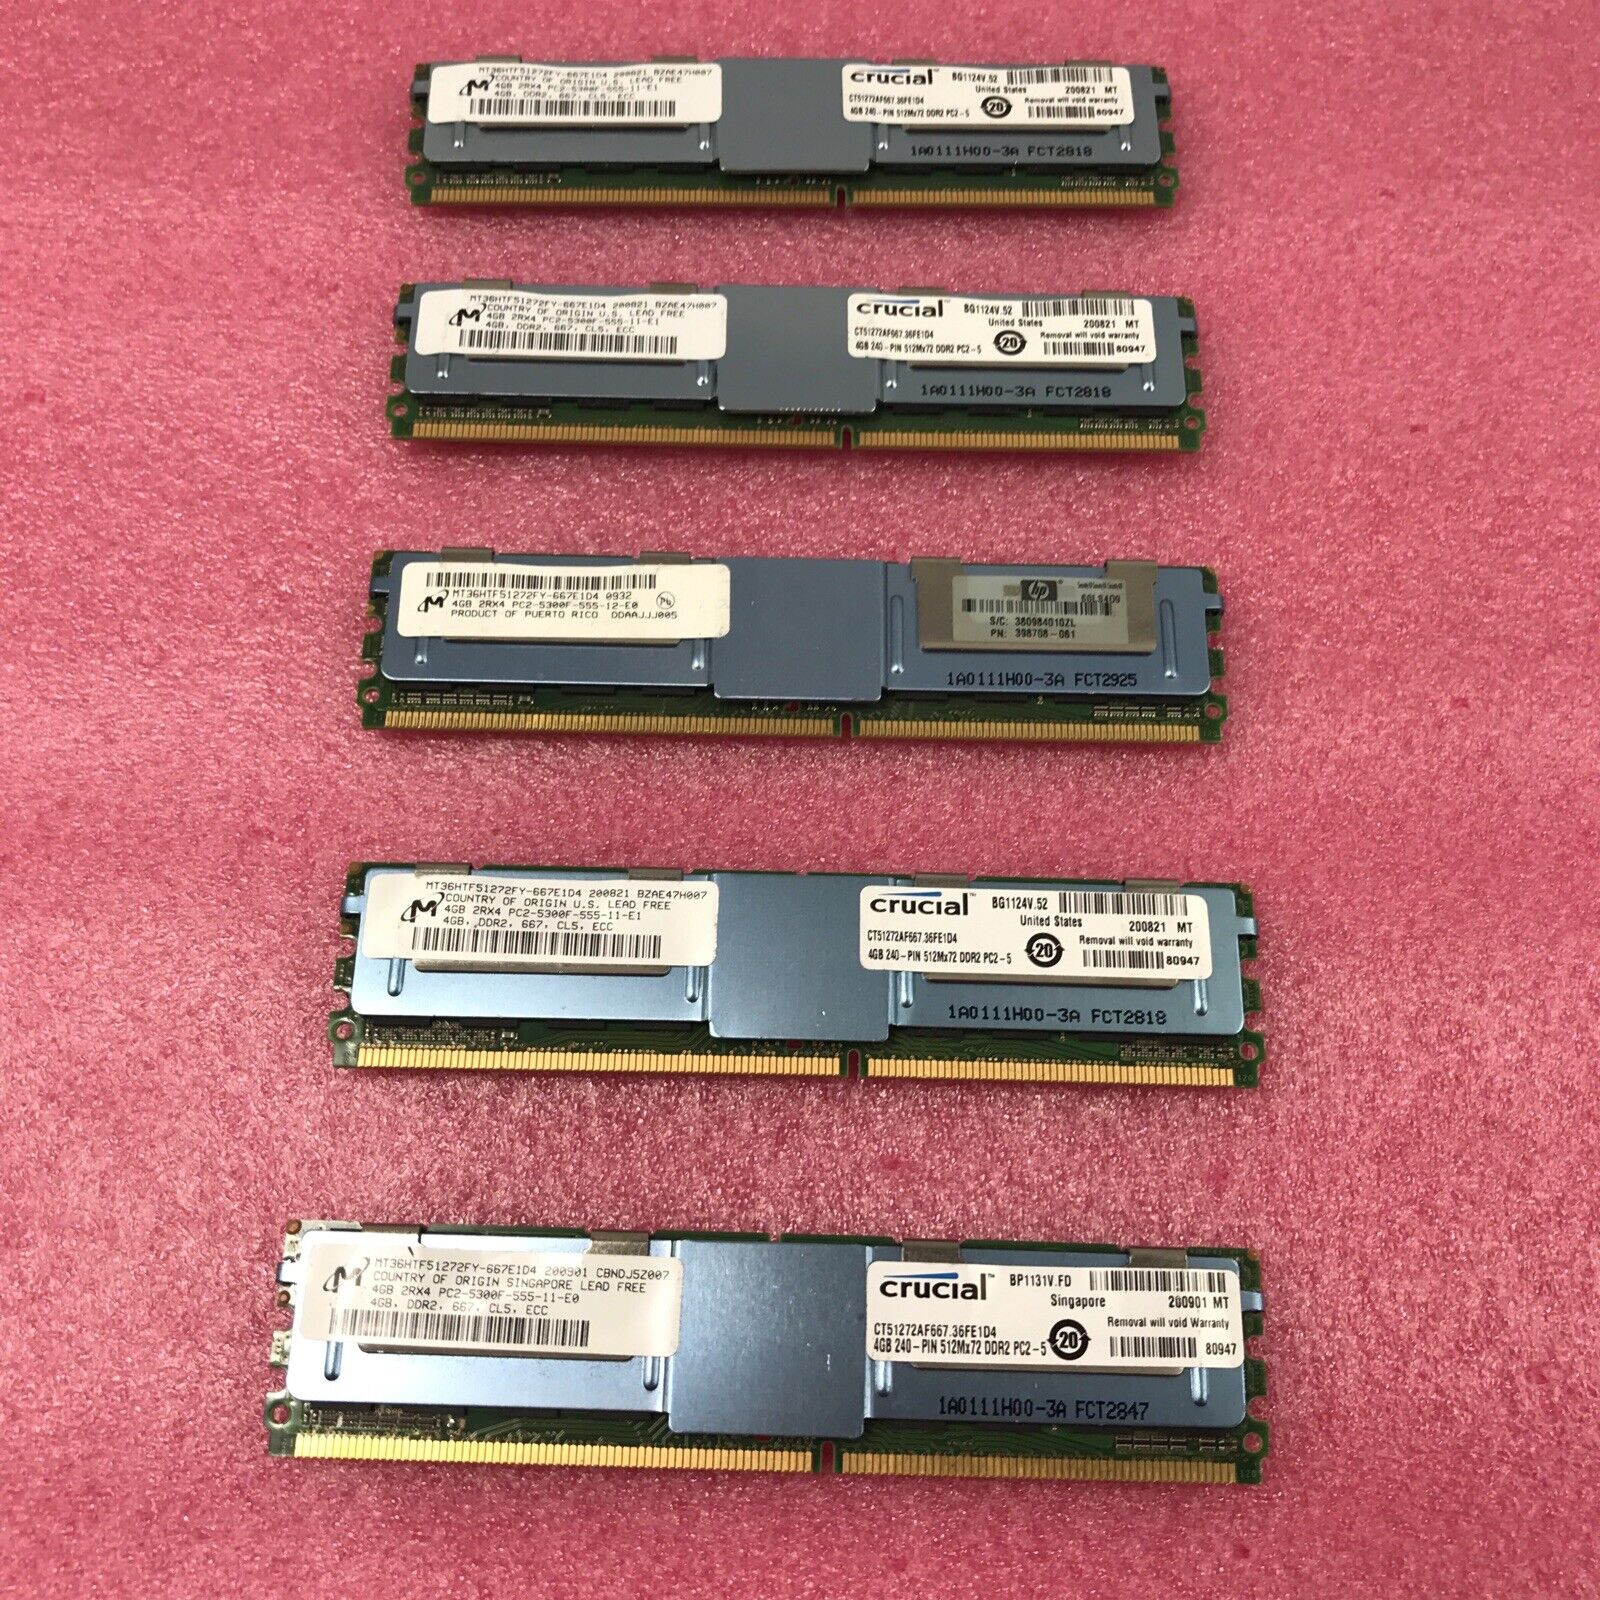 20GB Kit 5x 4GB 2XR4 PC2-5300F DDR2 CL5 ECC CT51272AF667 (Tested and Working)